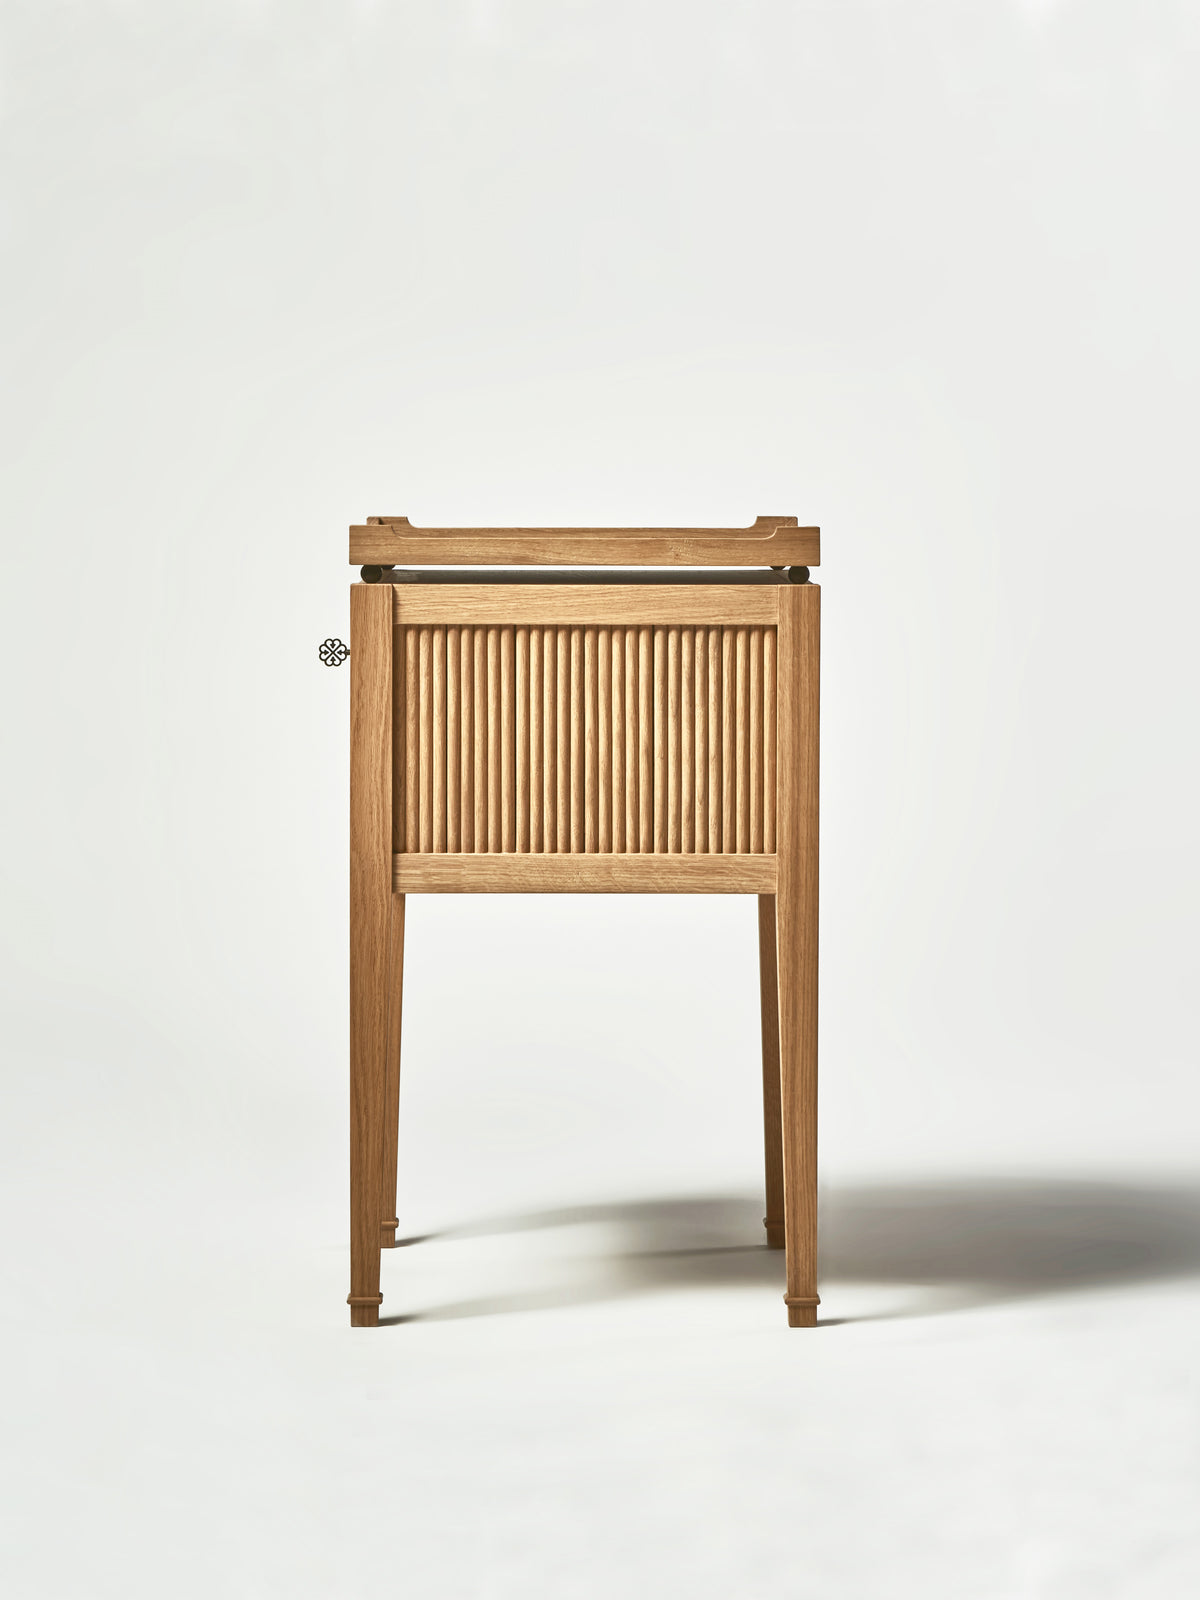 The Hanover Bedside Table